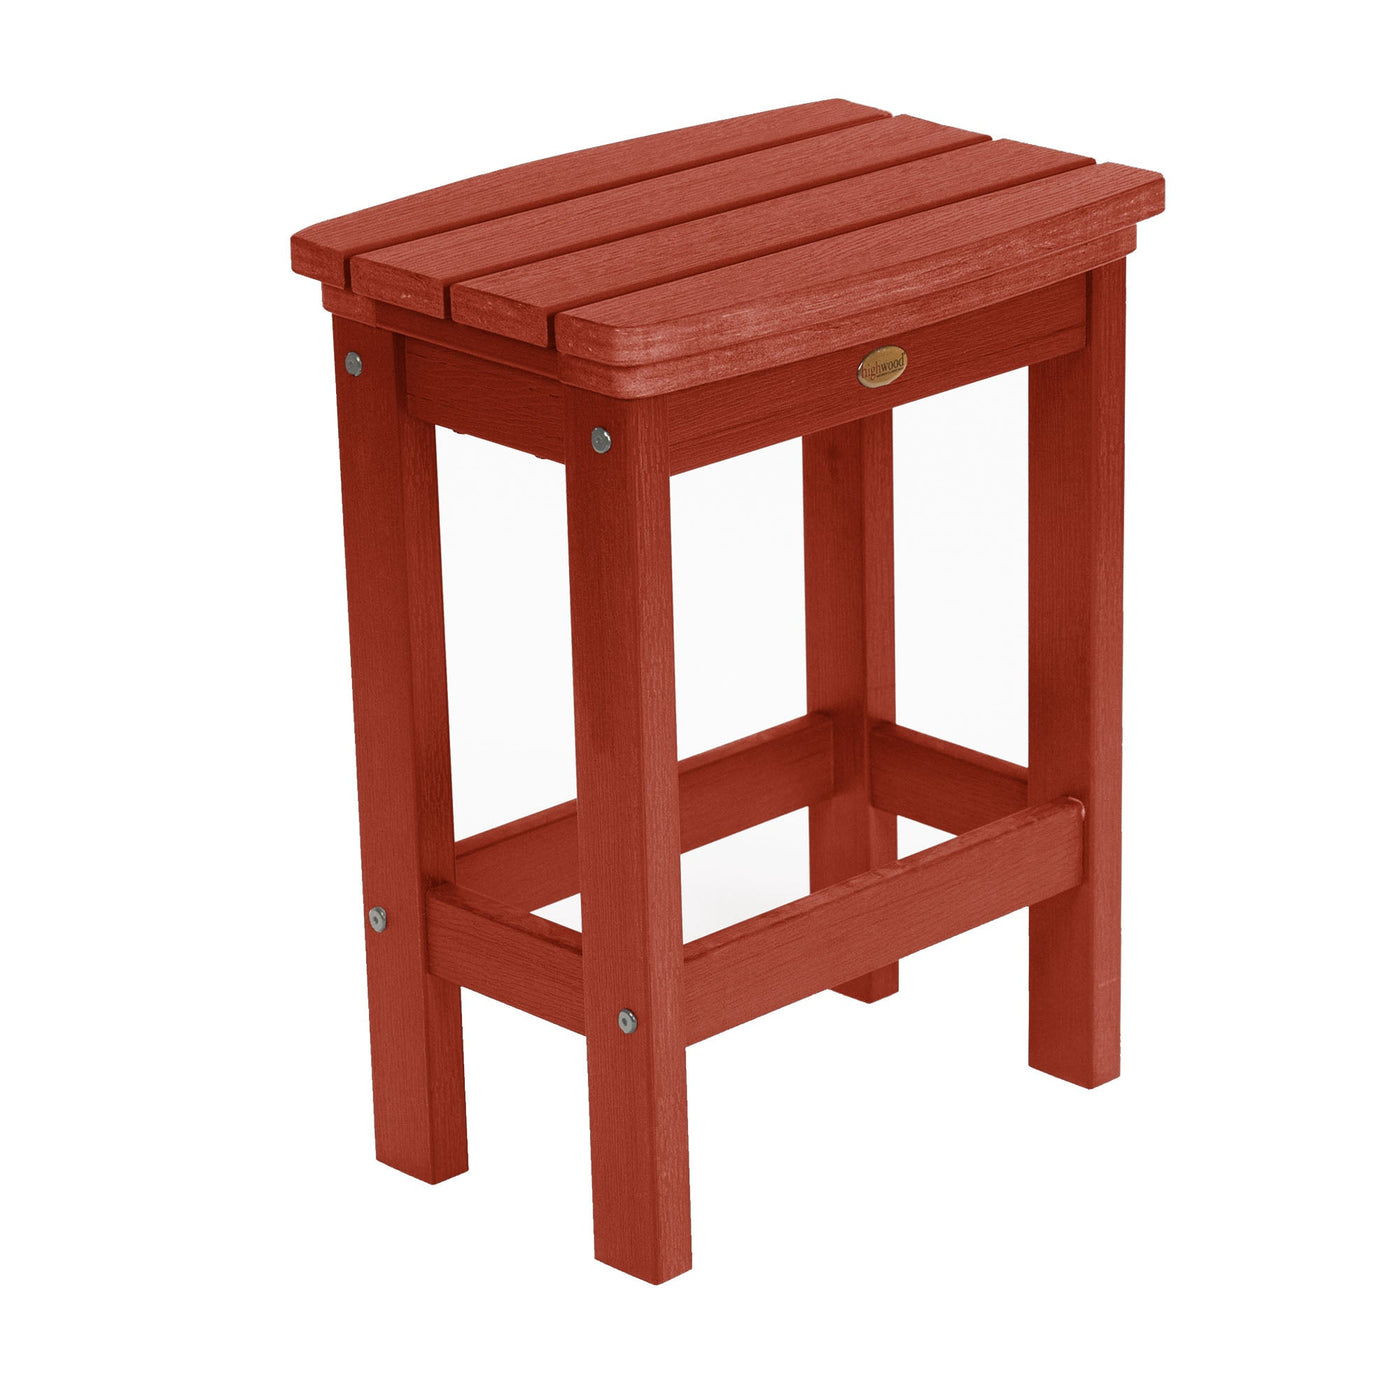 Lehigh counter height stool in Rustic Red